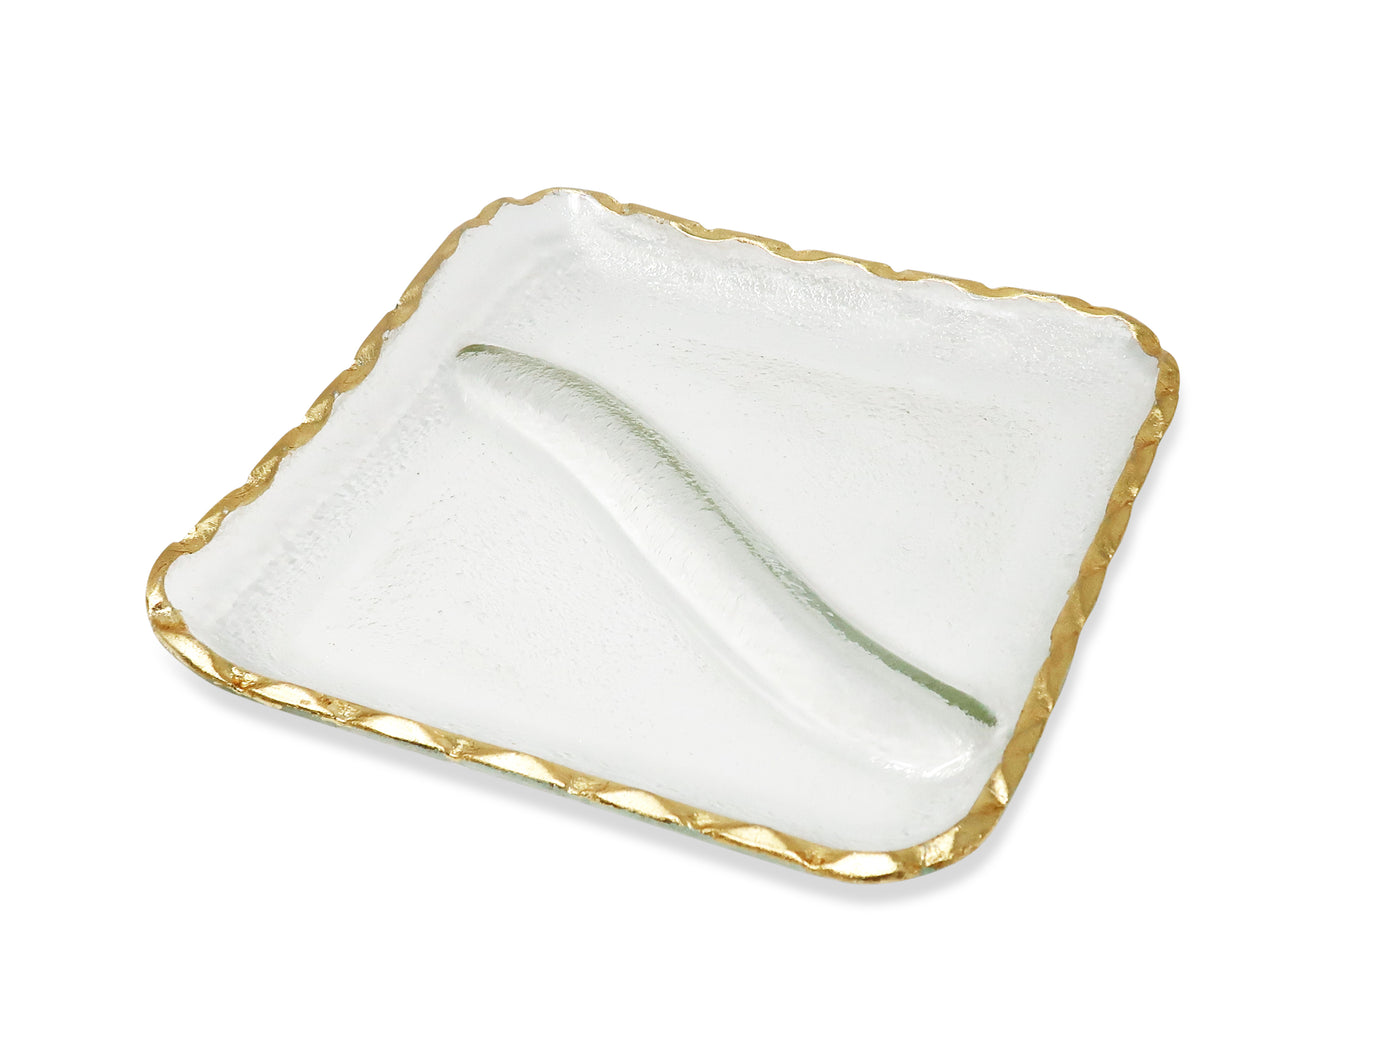 Glass Sectional Plate with Gold Rim